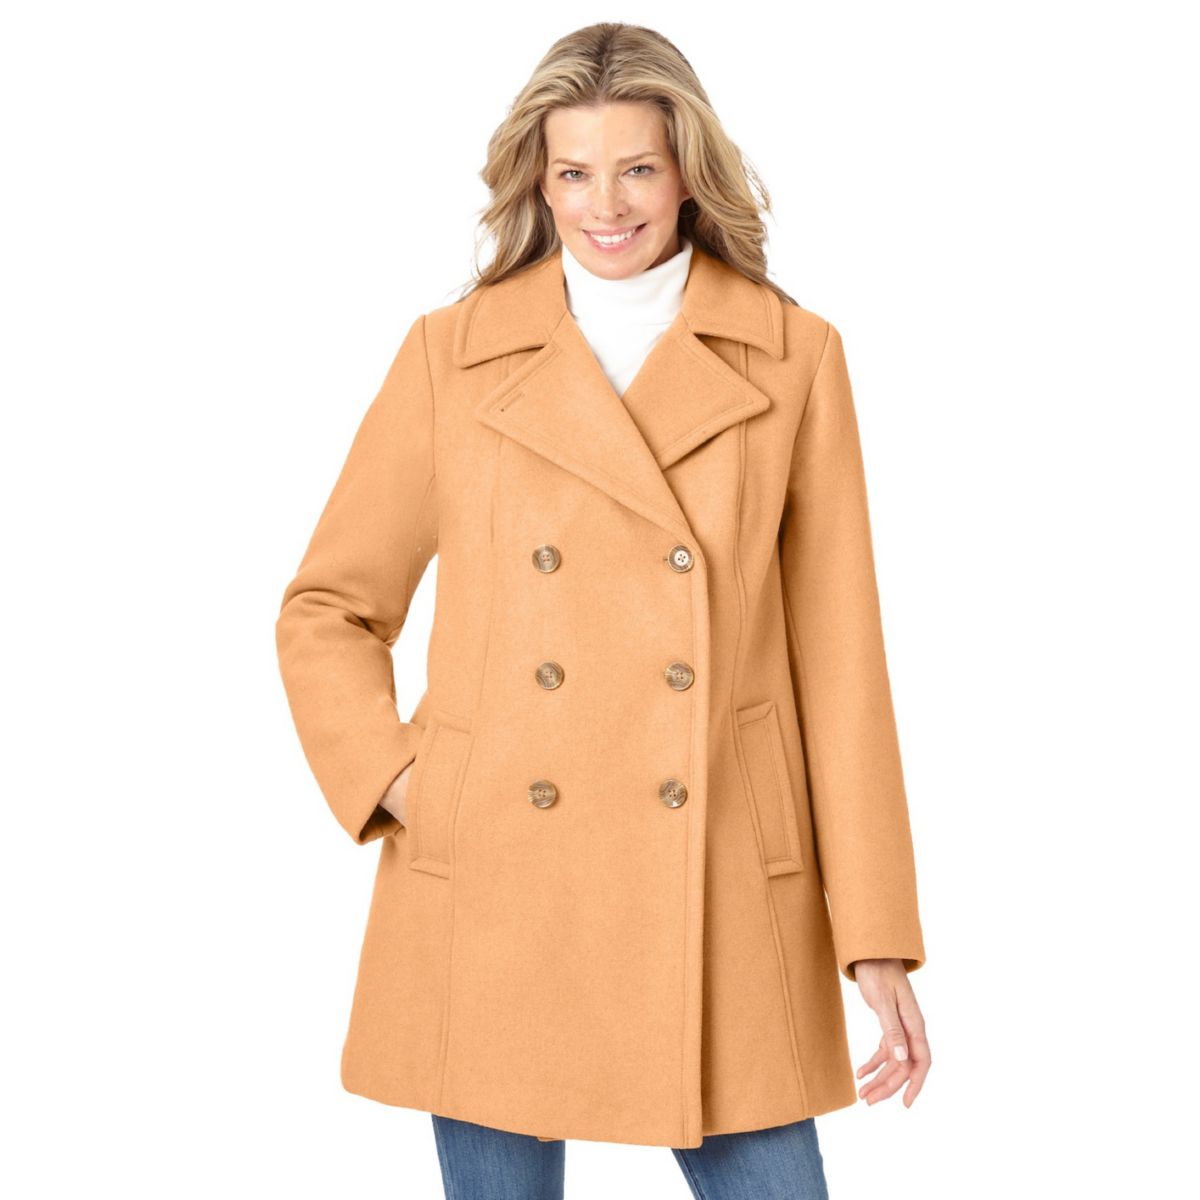 Woman Within Women's Plus Size Wool-blend Double-breasted Peacoat Woman Within